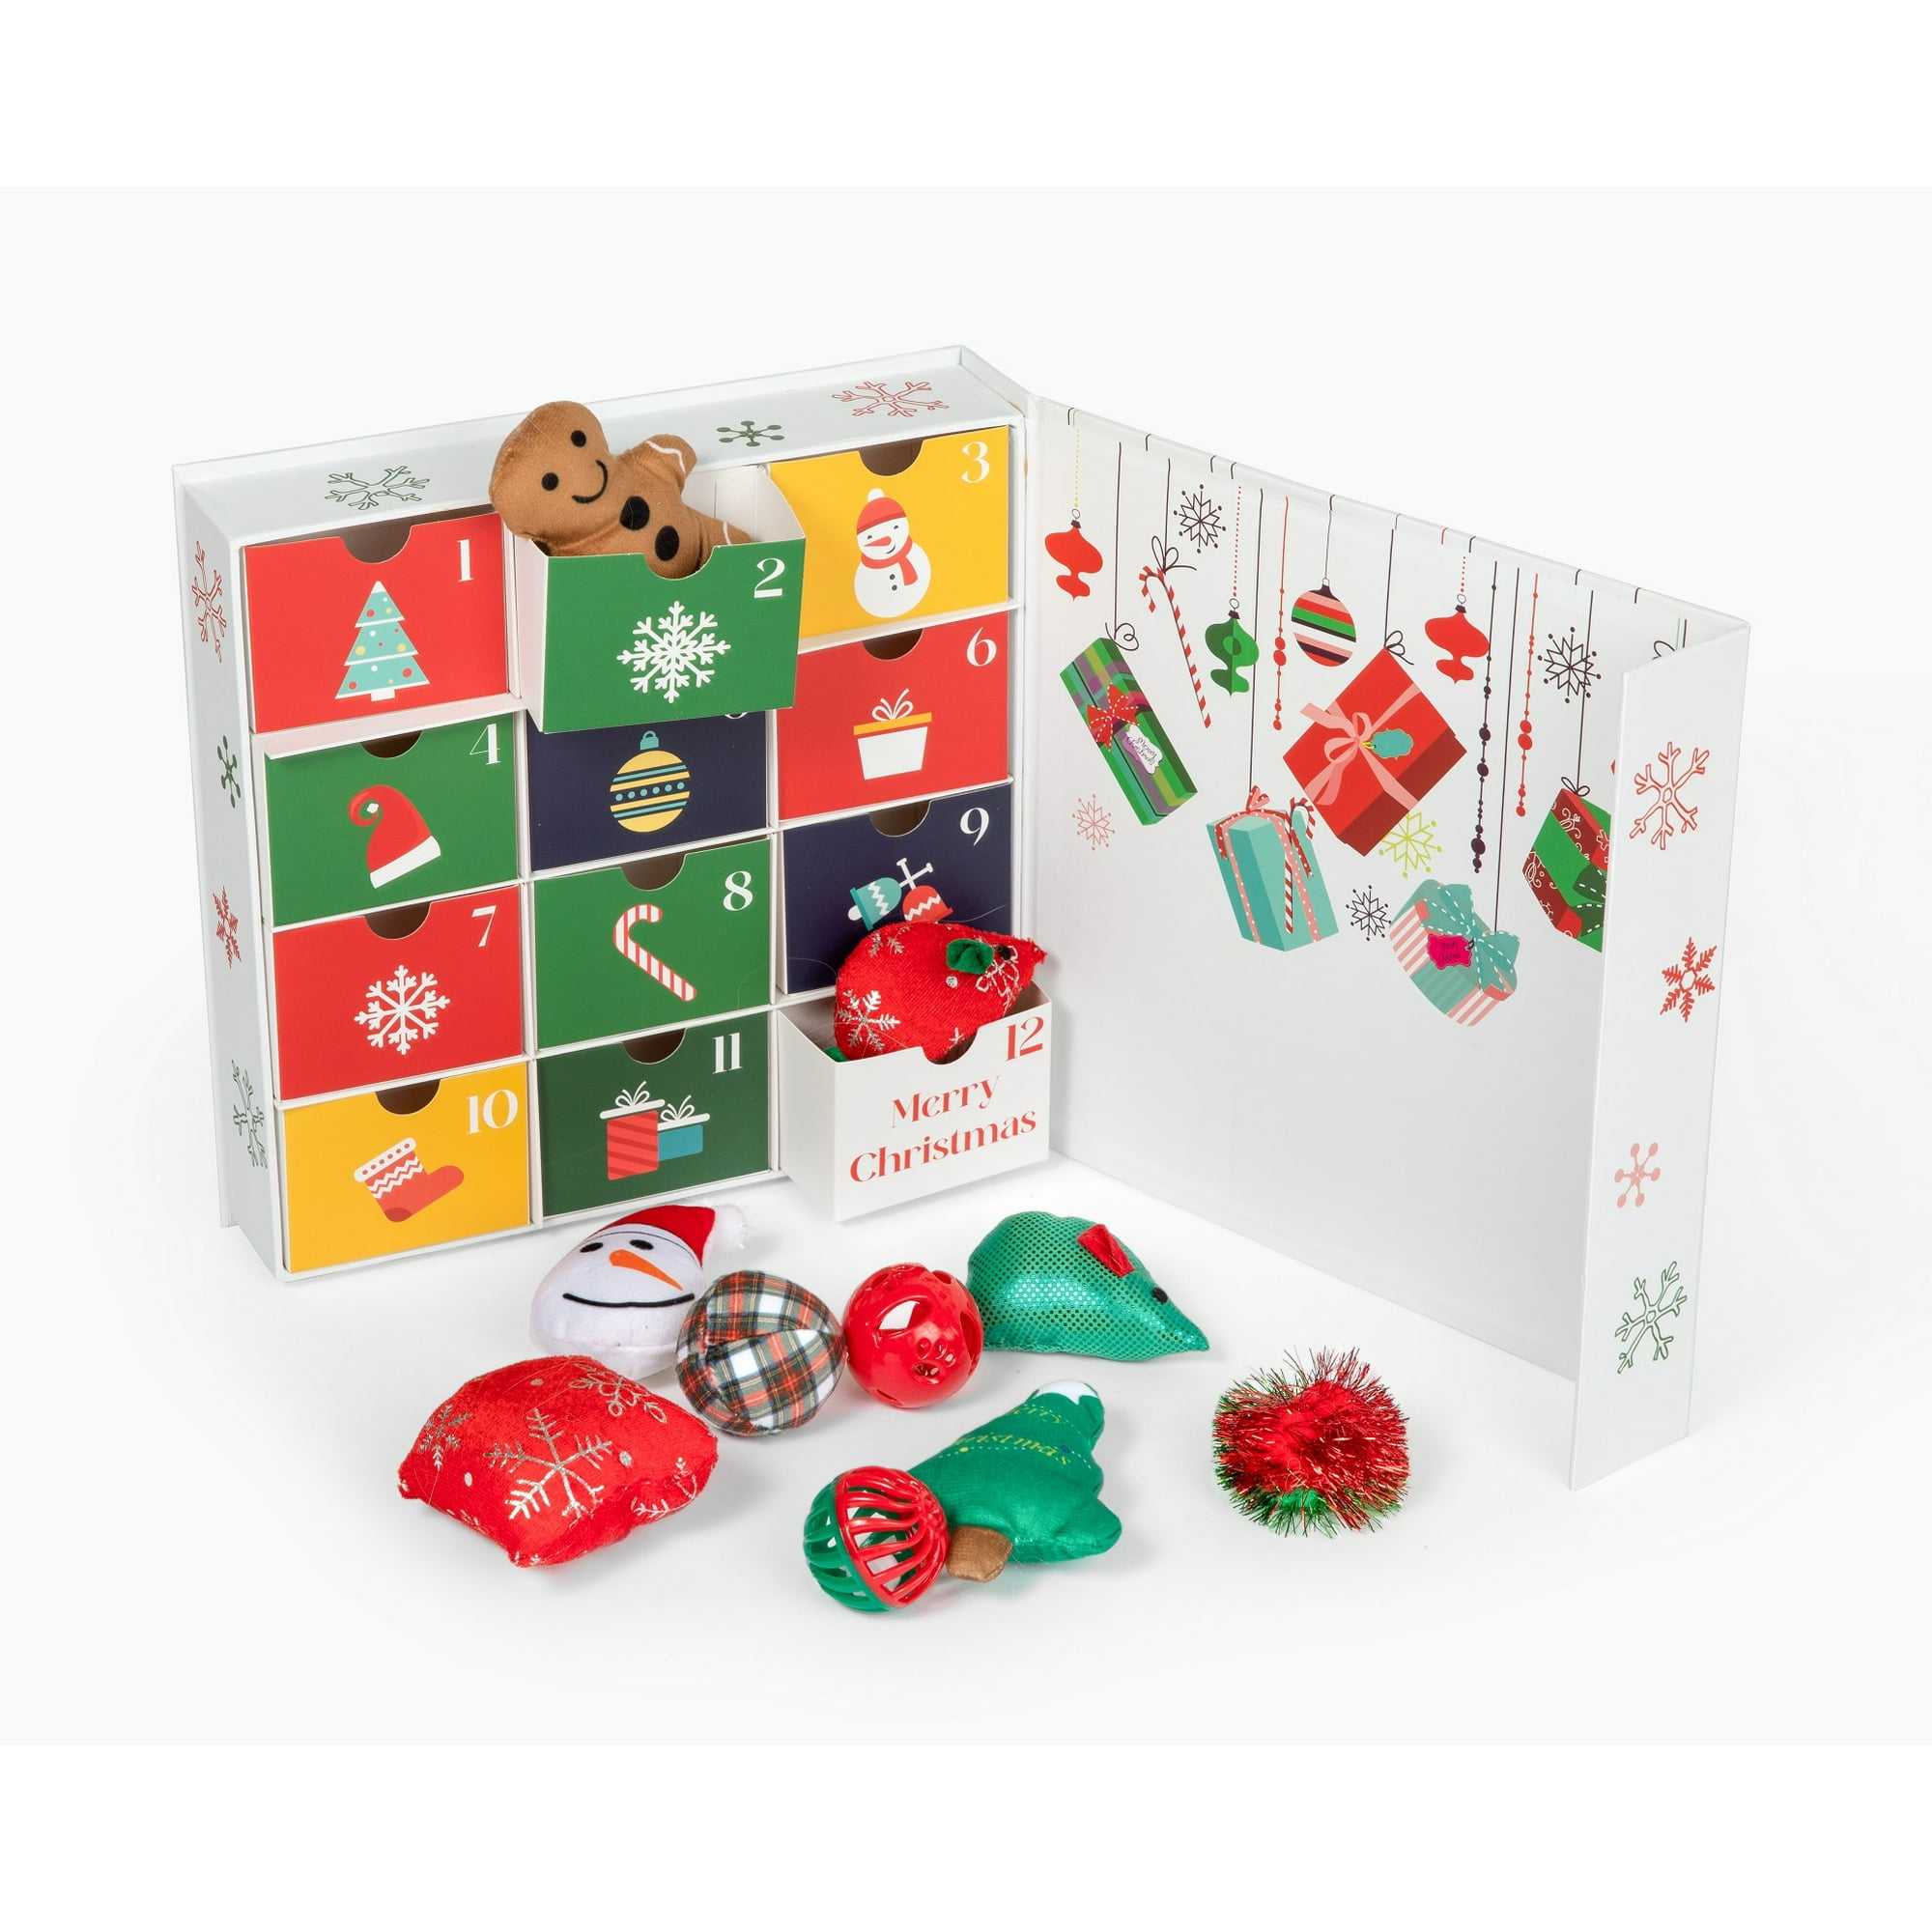 Midlee Cat Advent Calendar - 12 Days of Christmas-Filled Cat Toy Gift